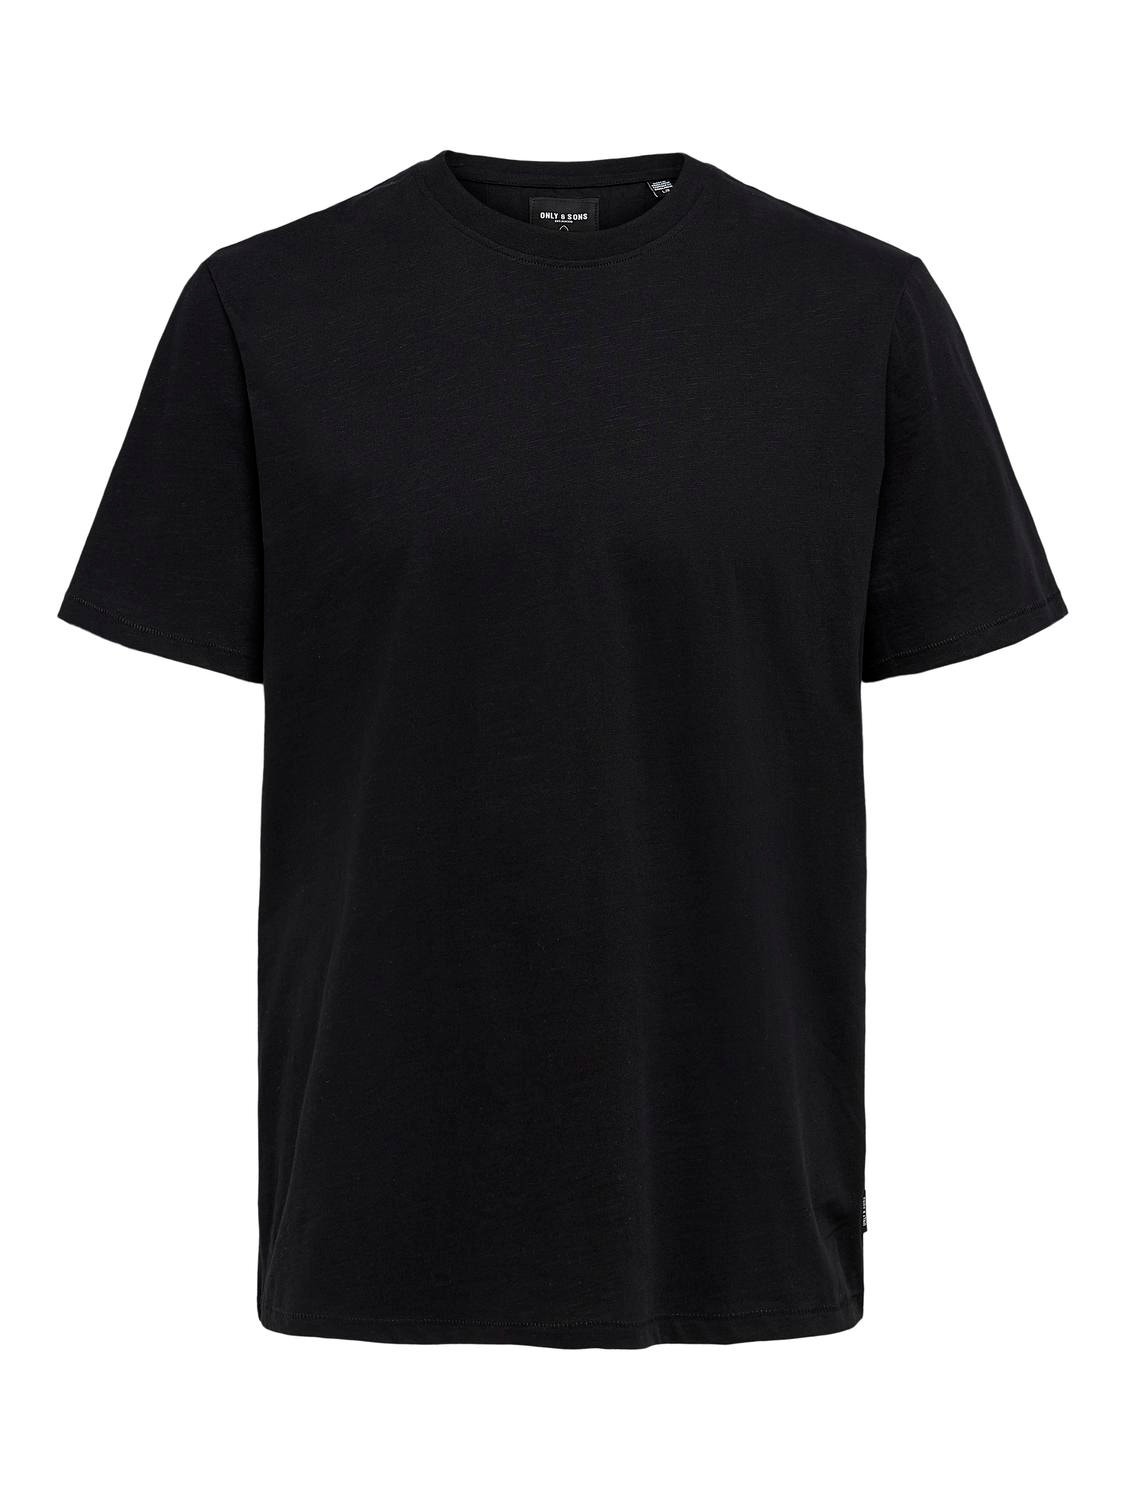 ONLY & SONS o-neck t-shirt -Black - 22020074